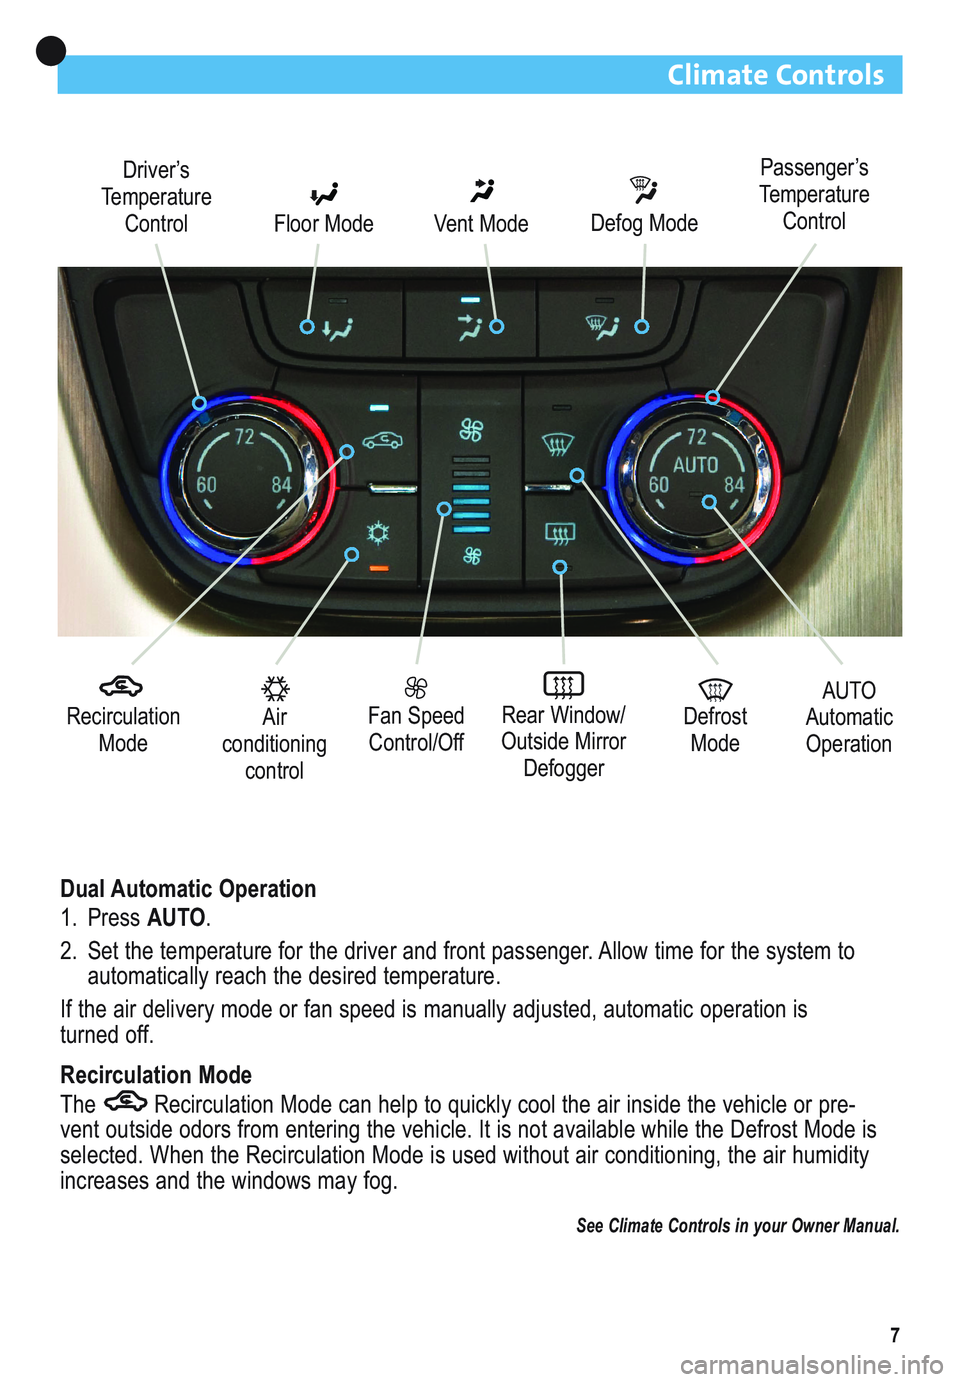 BUICK VERANO 2012  Get To Know Guide 7
Climate Controls
Recirculation
Mode
Driver’s
Temperature
Control Floor Mode
Vent ModeDefog Mode
Fan Speed
Control/OffRear Window/
Outside Mirror
DefoggerAir
conditioning
control
AUTO
Automatic
Ope